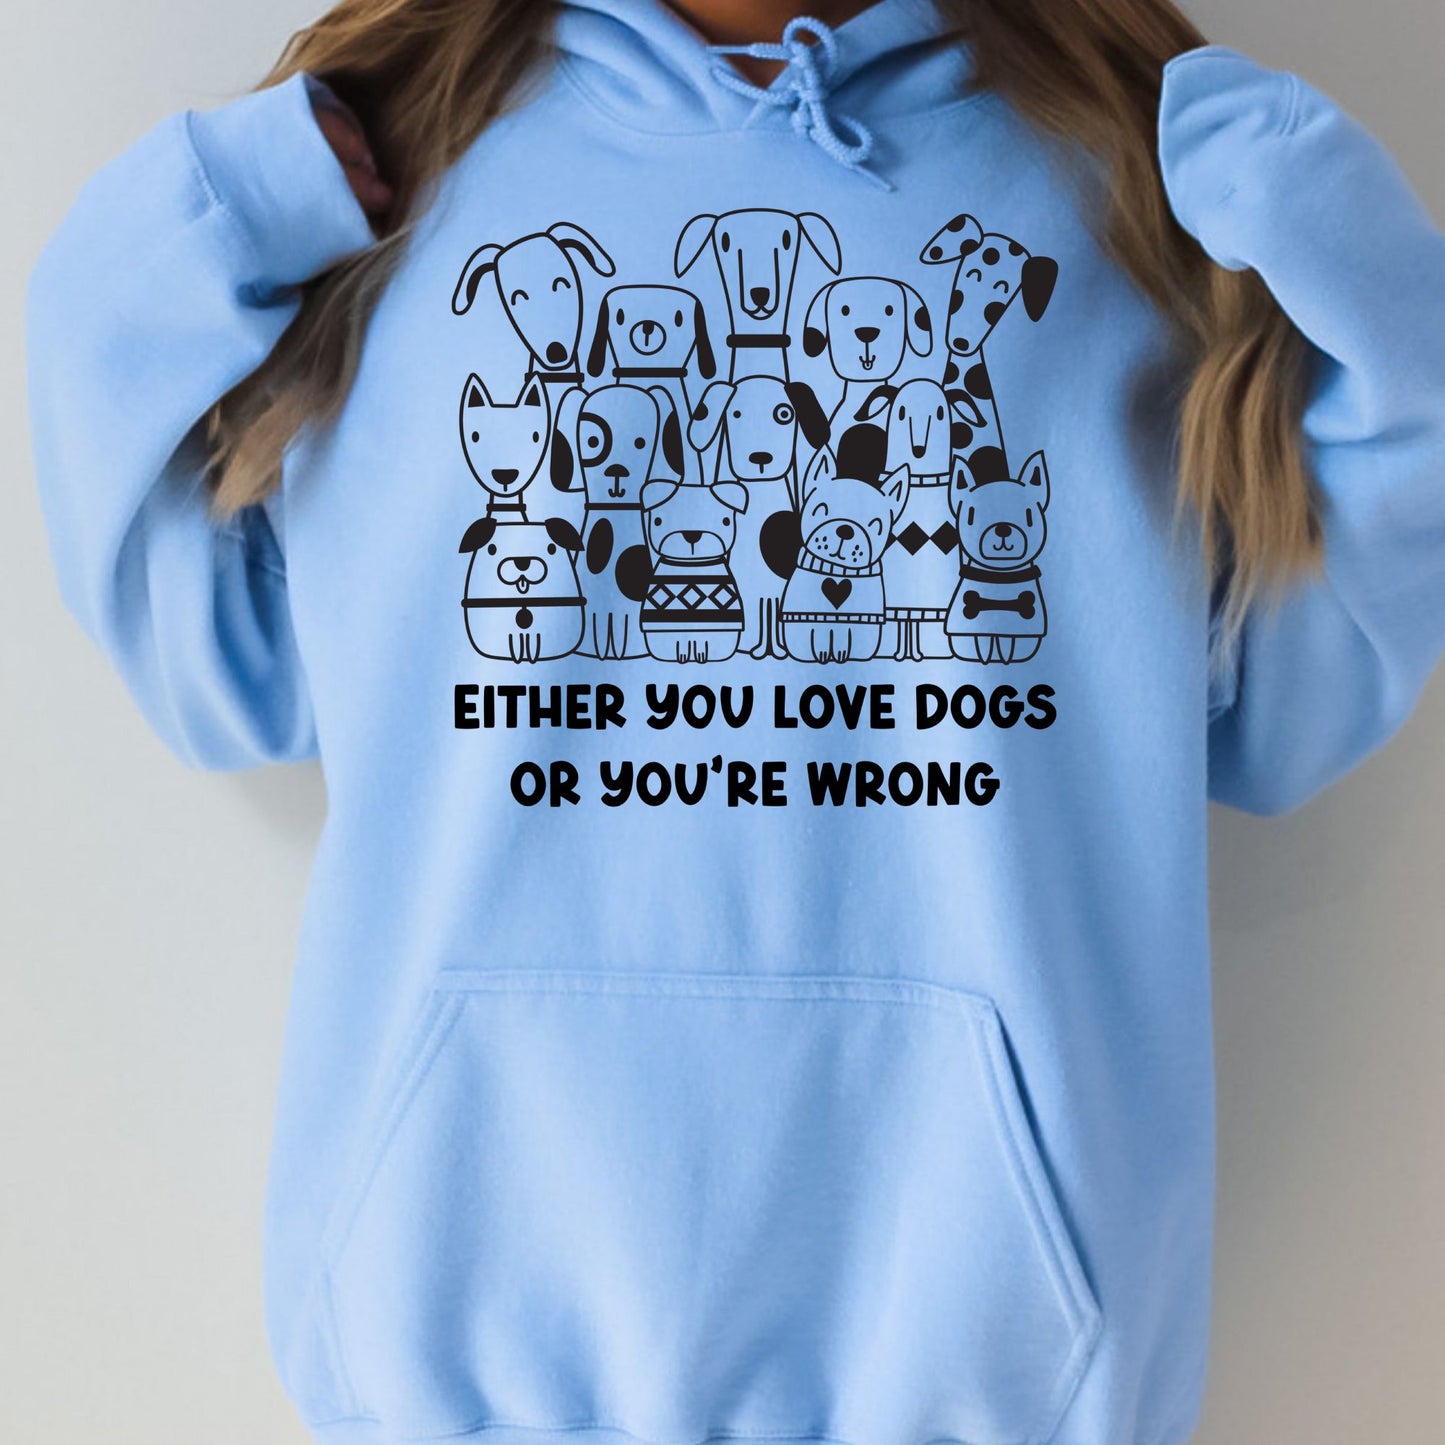 Either You Love Dogs or You're Wrong Hooded Sweatshirt - PuppyJo Sweatshirt S / Light Blue